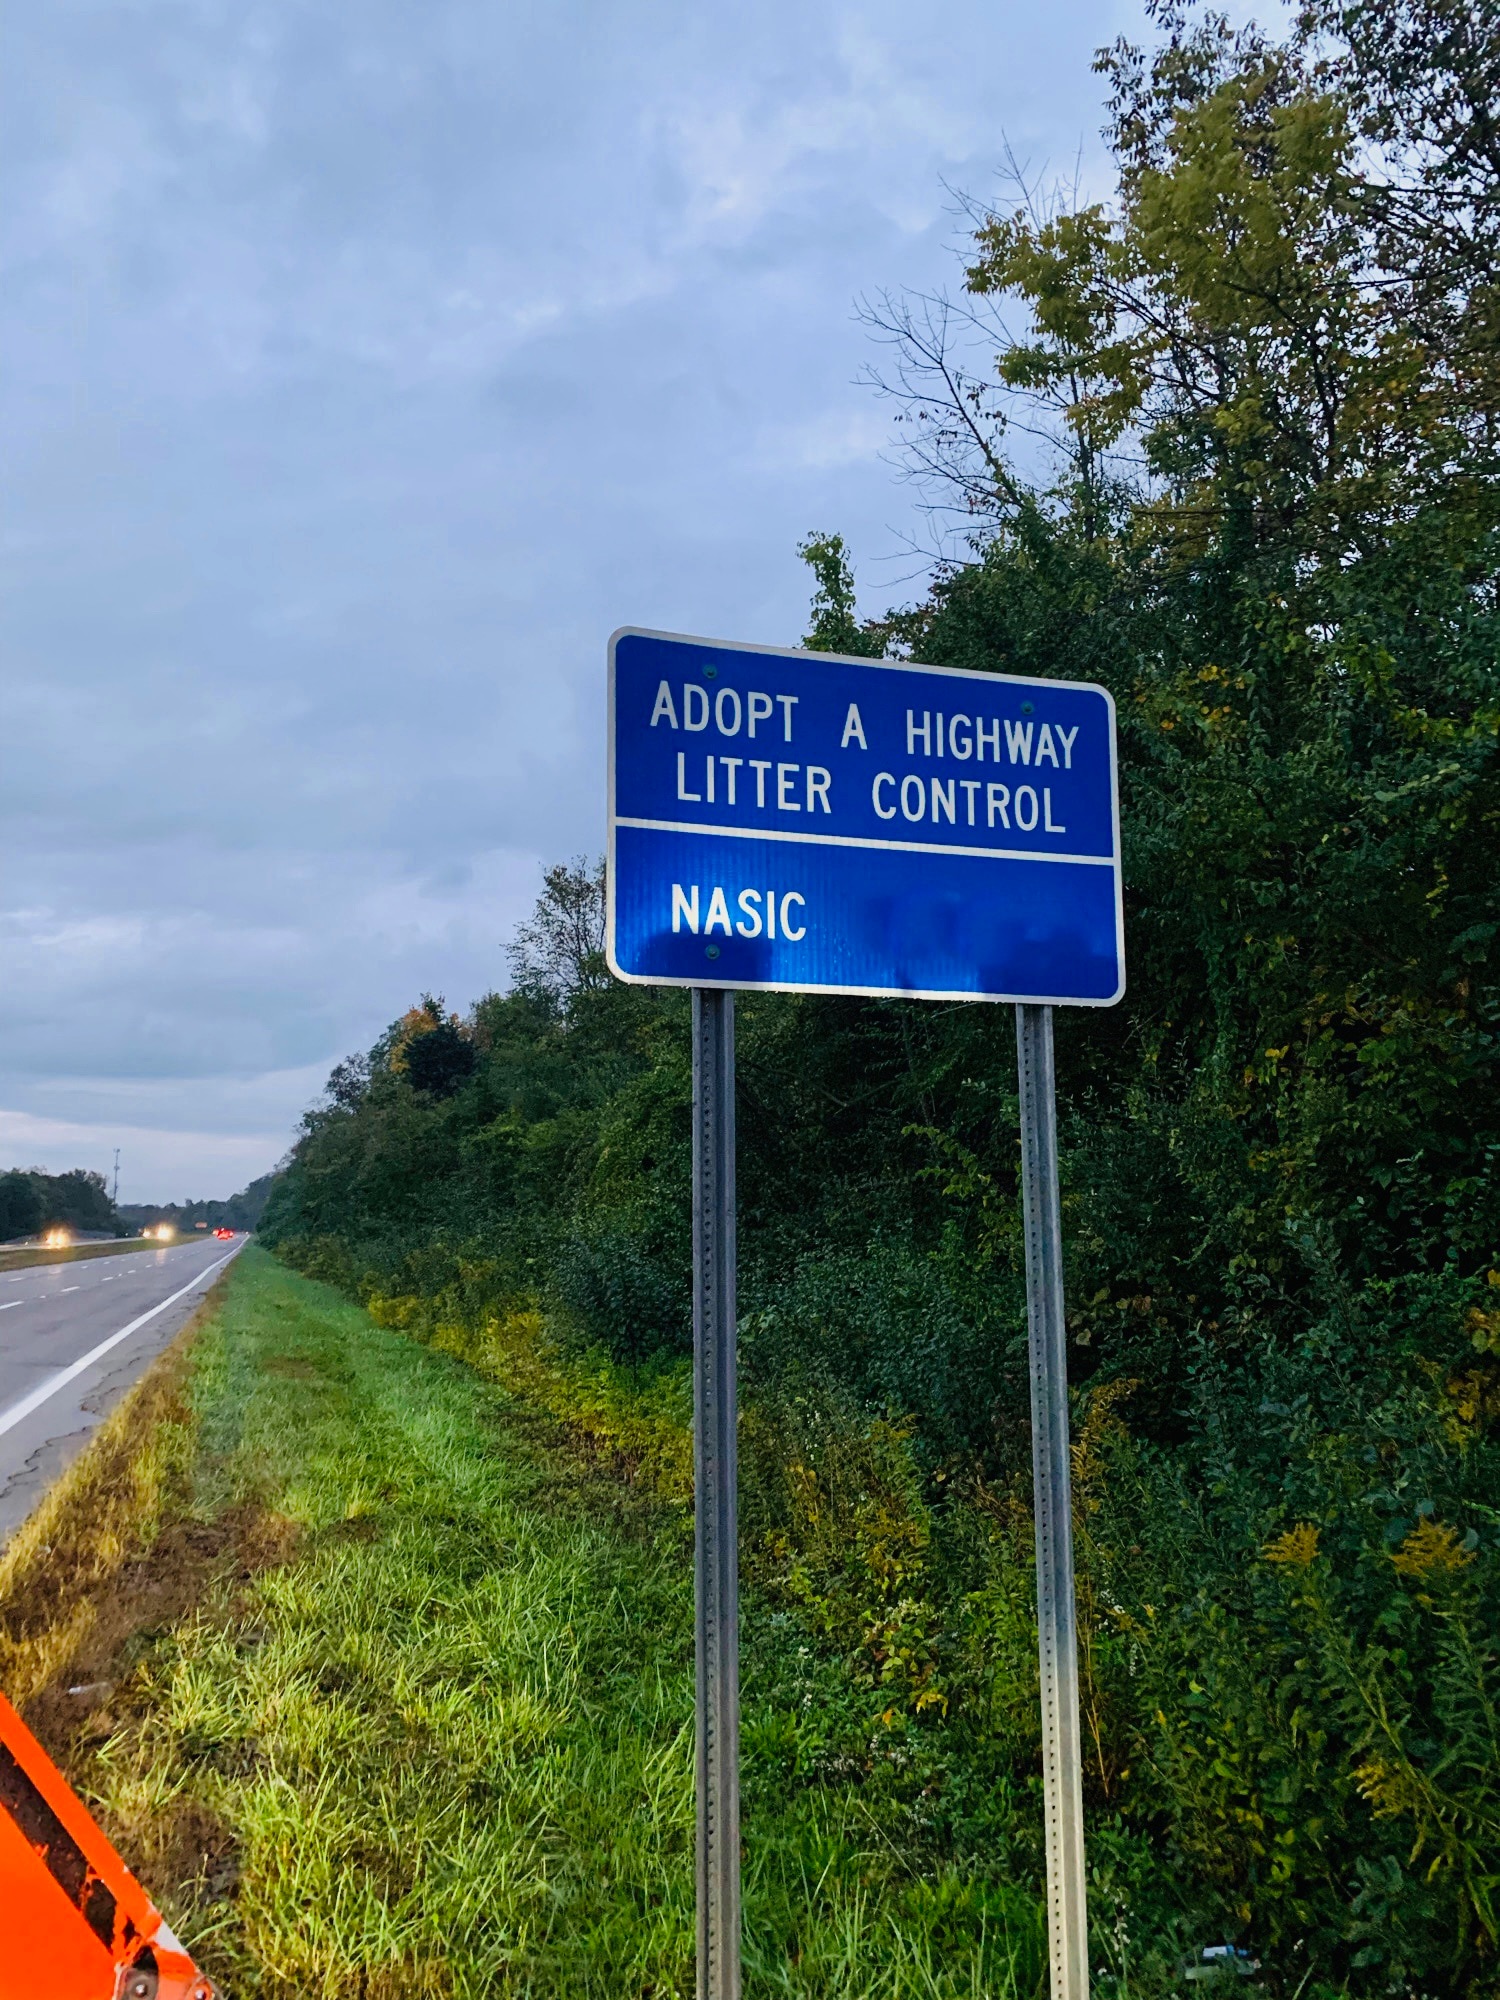 Volunteers from the National Air and Space Intelligence Center on Wright-Patterson Air Force Base devoted their time to picking up trash Oct. 7 on state Route 444 as part of an Adopt-A-Highway community-cleanup program with the Ohio Department of Transportation. (Contributed photo)